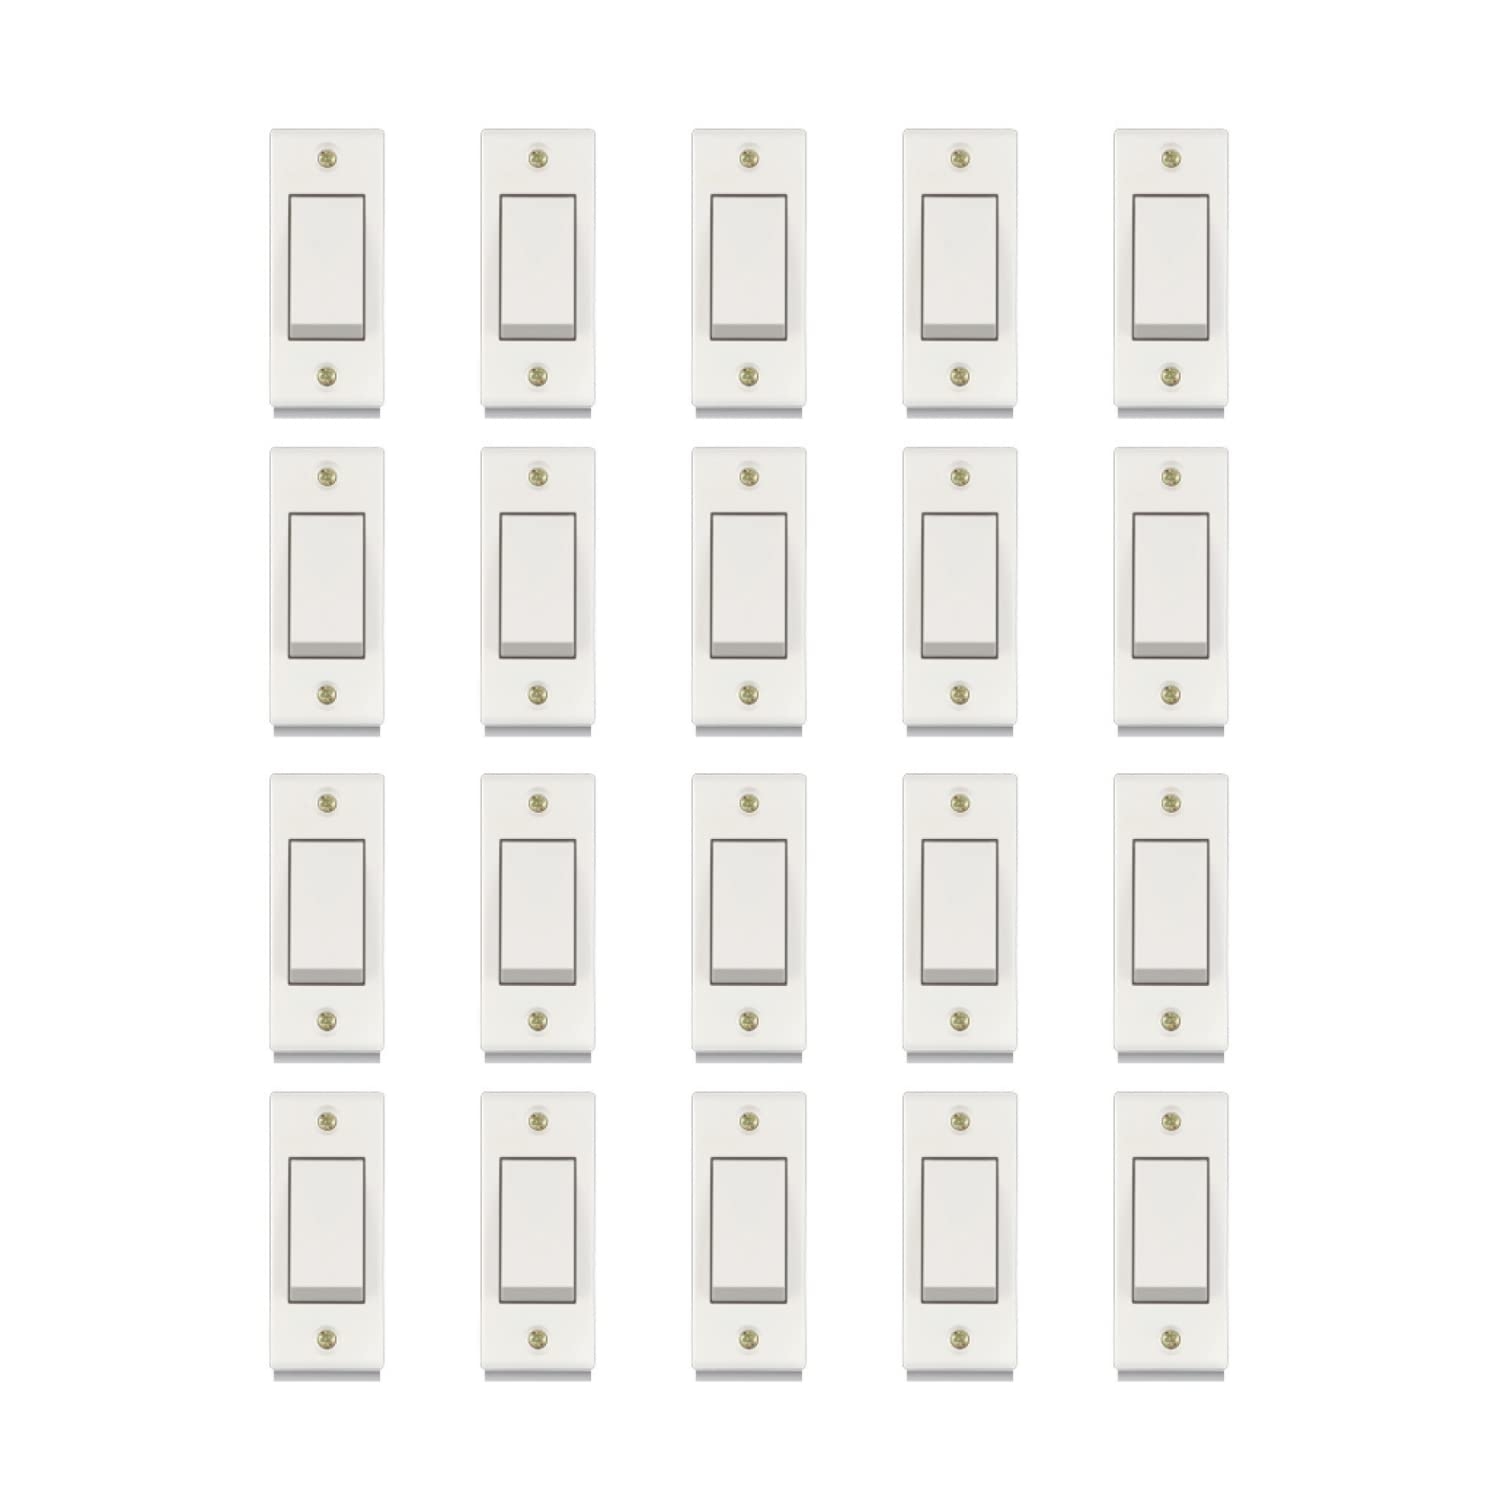 Anchor Penta 6A, 1way switch Deluxe (38194) (20 pcs)